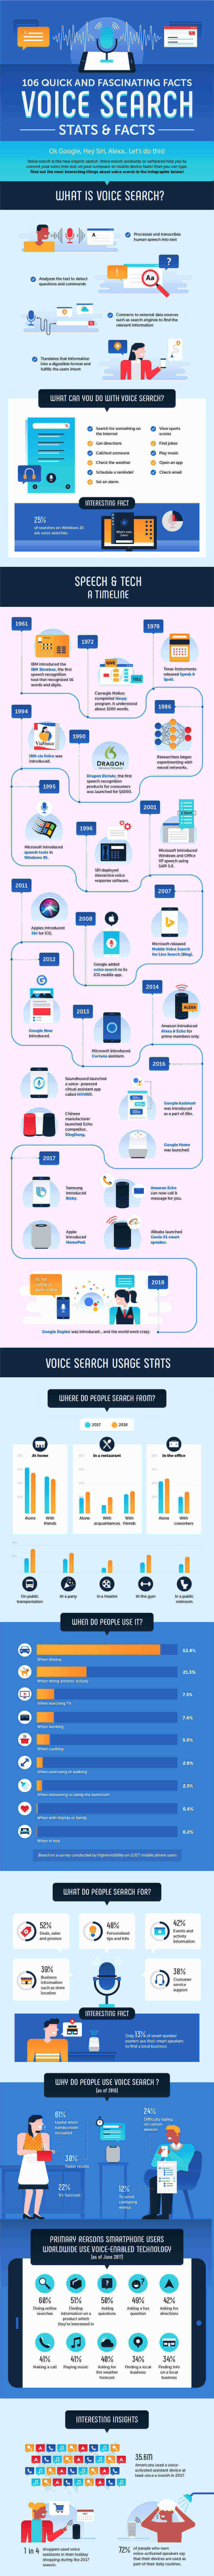 Evolution of voice search